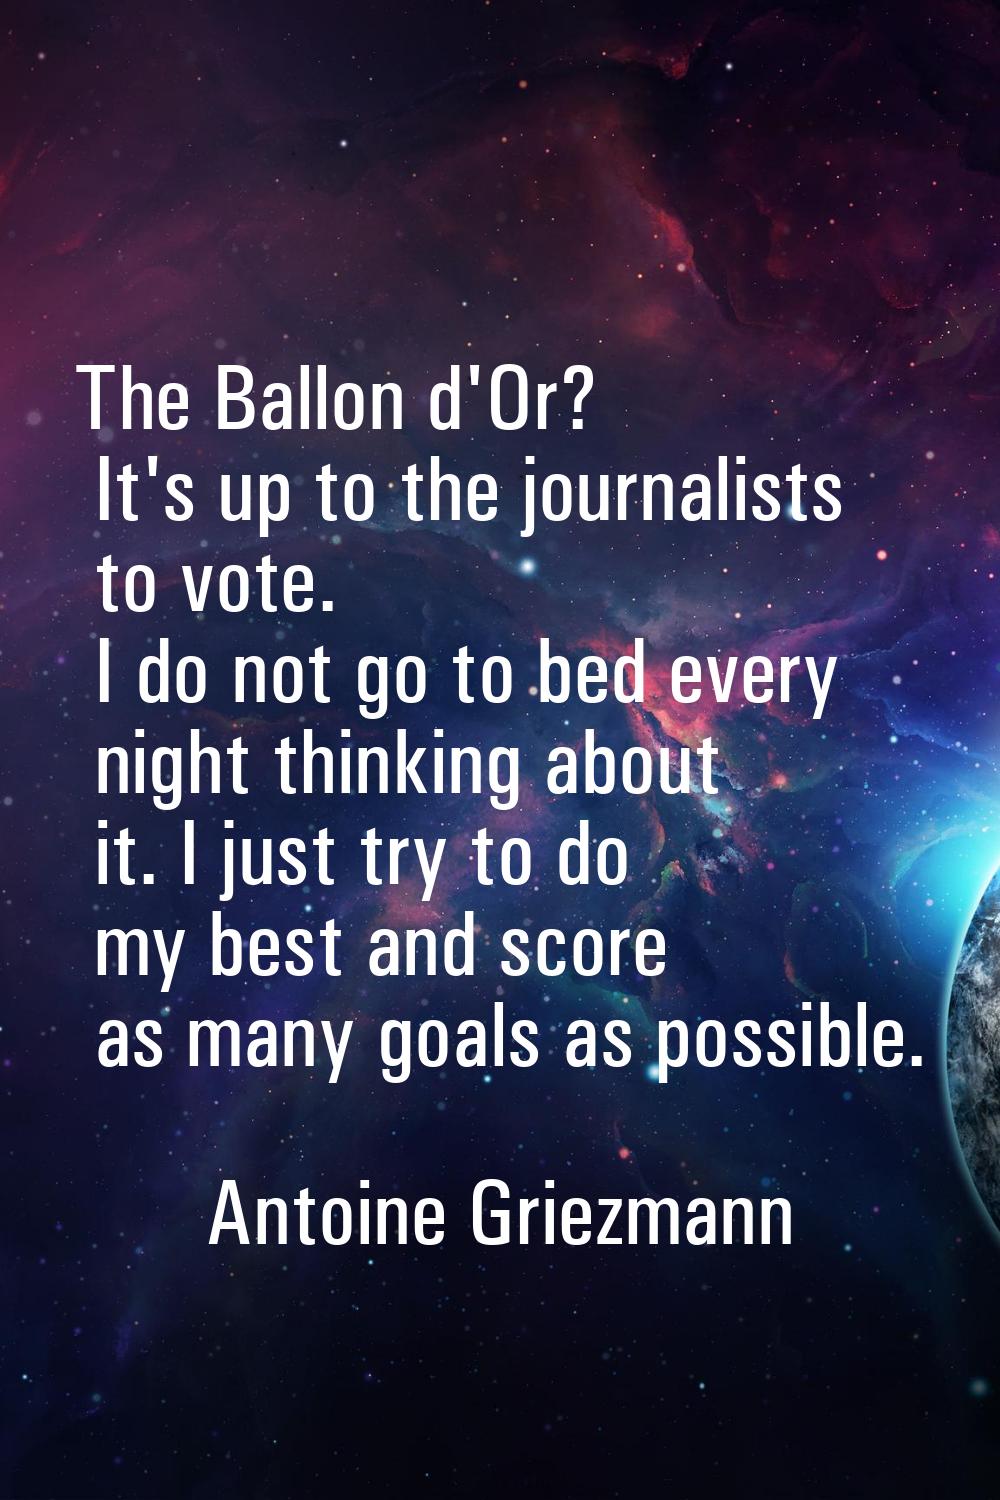 The Ballon d'Or? It's up to the journalists to vote. I do not go to bed every night thinking about 